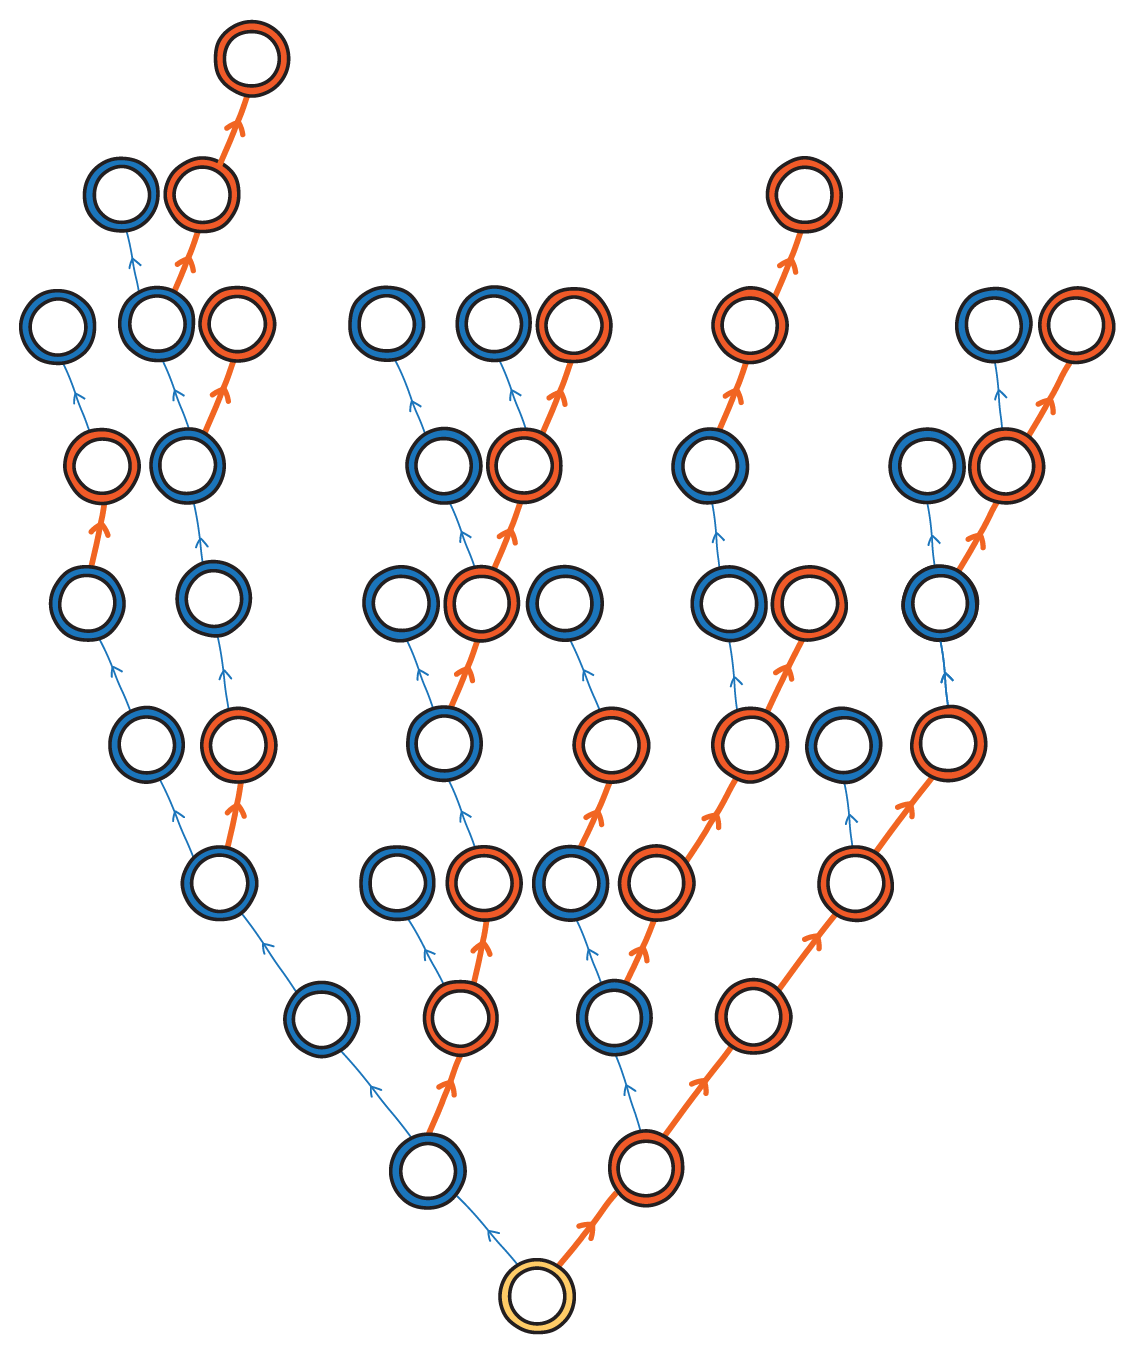 A large empty binary search tree.